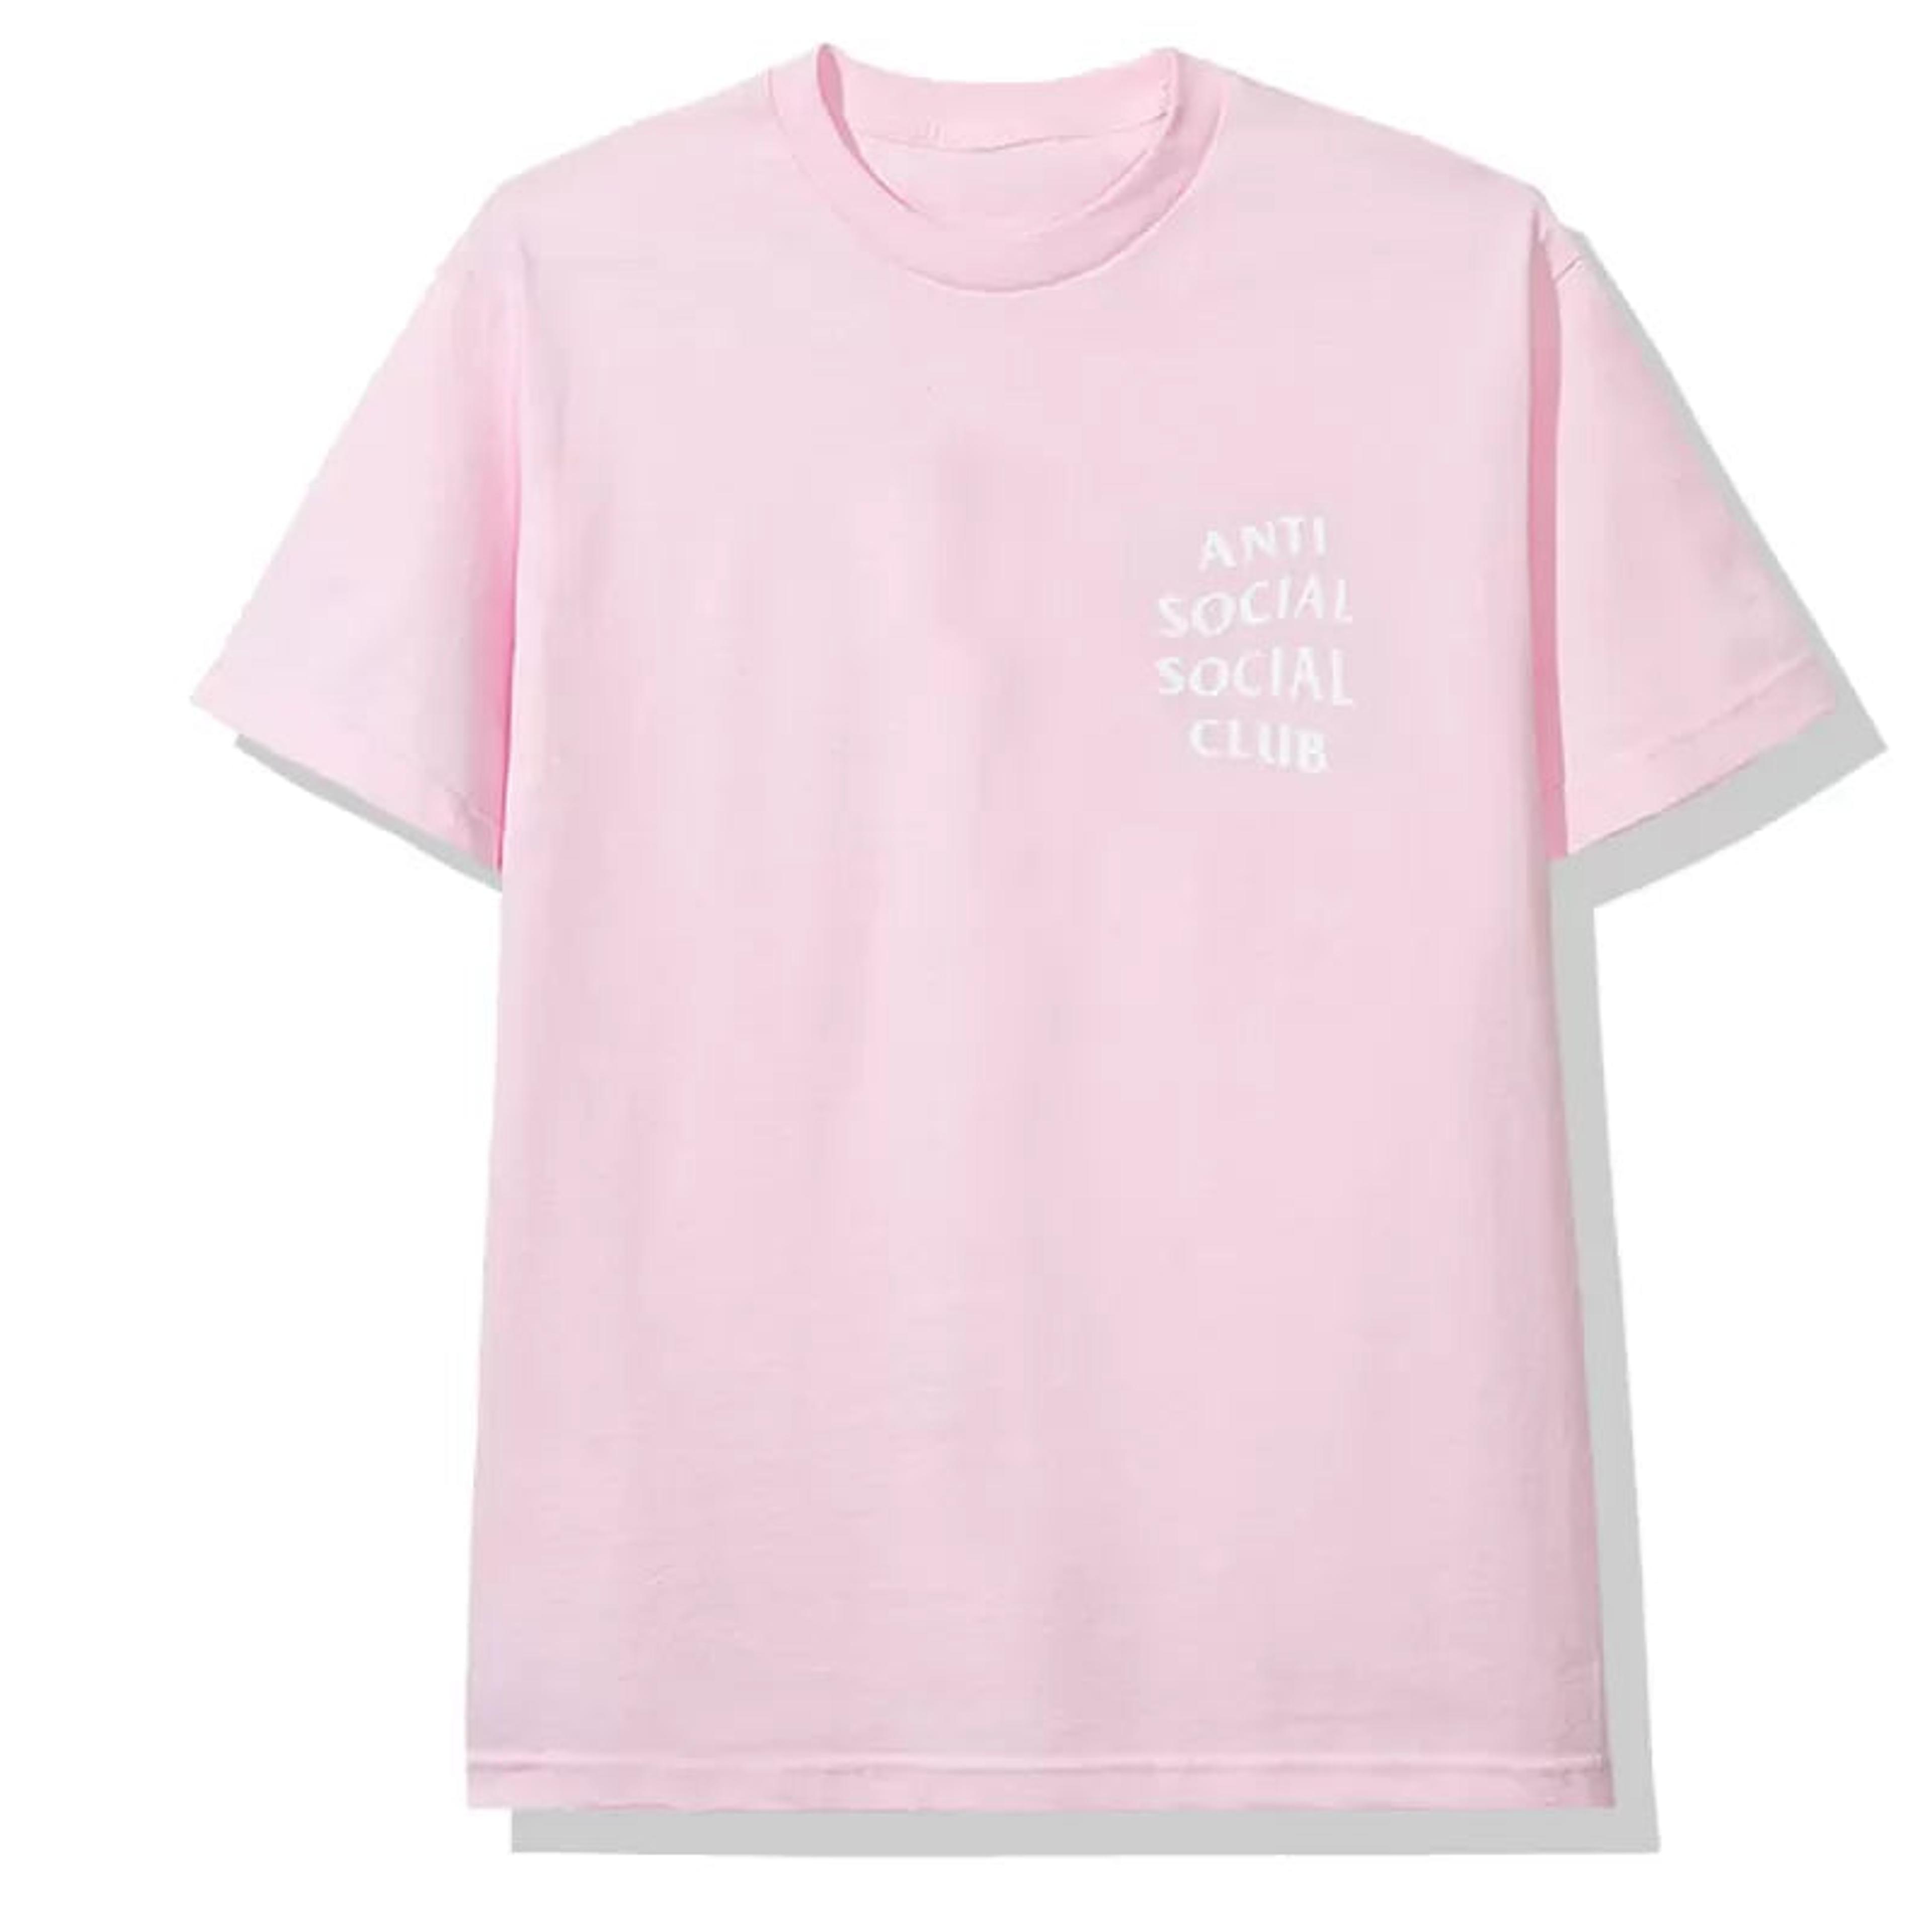 Alternate View 1 of Anti Social Social Club Smells Bad Pink Tee ASSC DS Brand New